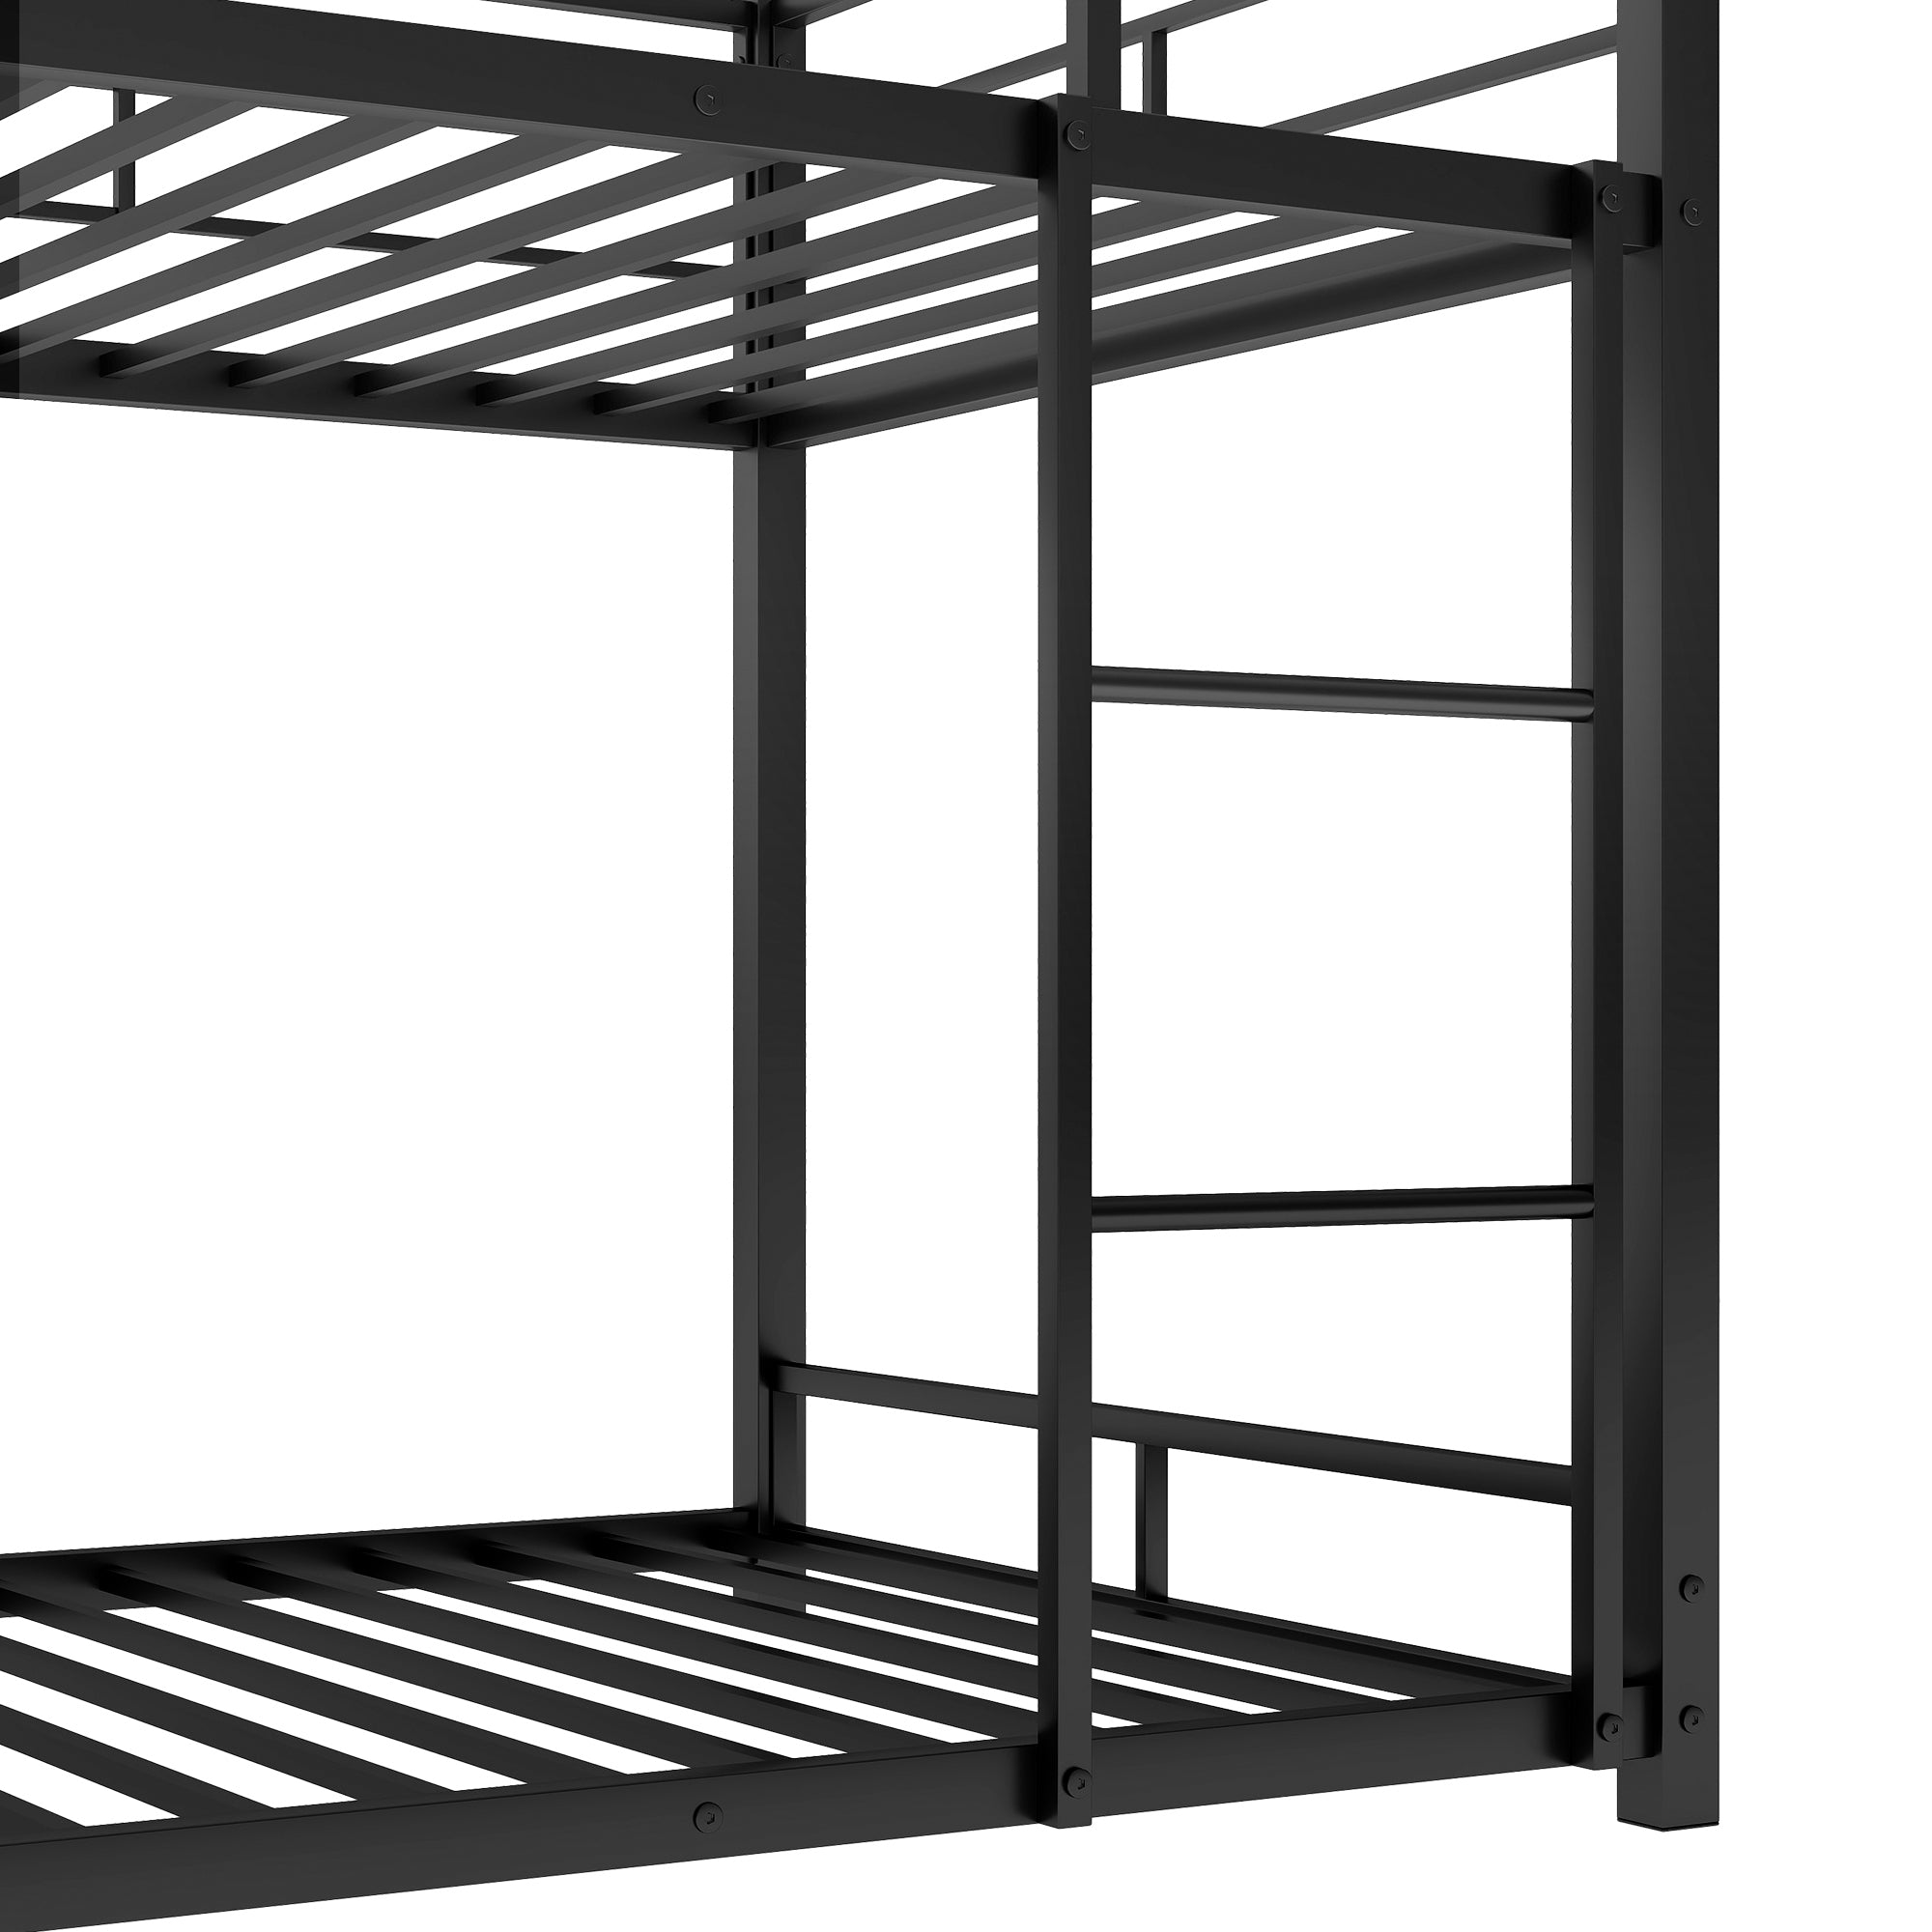 Metal Twin Size Triple Bunk Bed | Black | Space-Saving Solution | Sturdy Construction